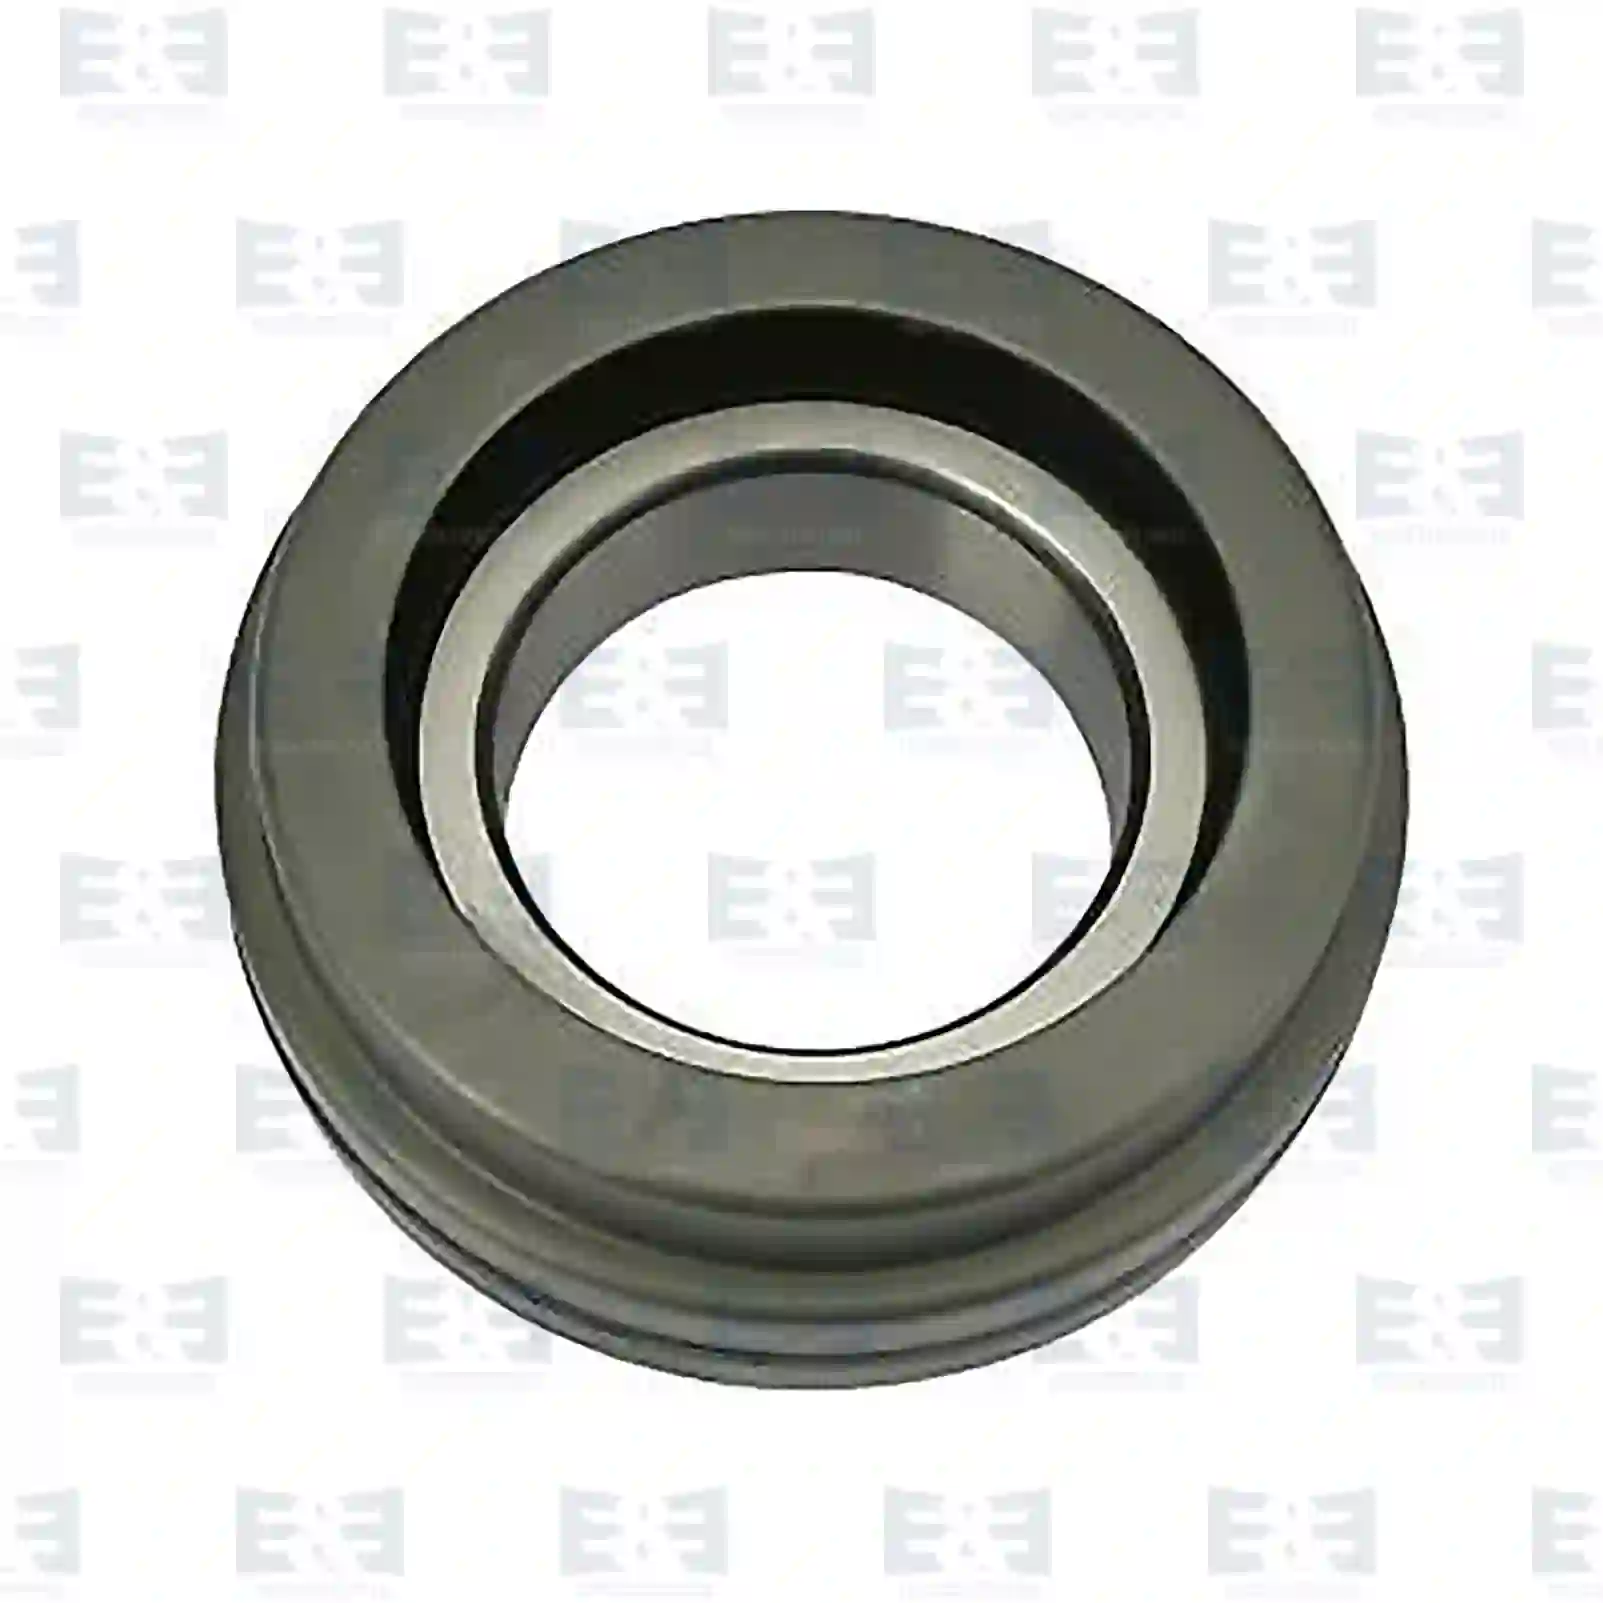 Support Bearing Ball bearing, center bearing, EE No 2E2276963 ,  oem no:3634100151, , E&E Truck Spare Parts | Truck Spare Parts, Auotomotive Spare Parts